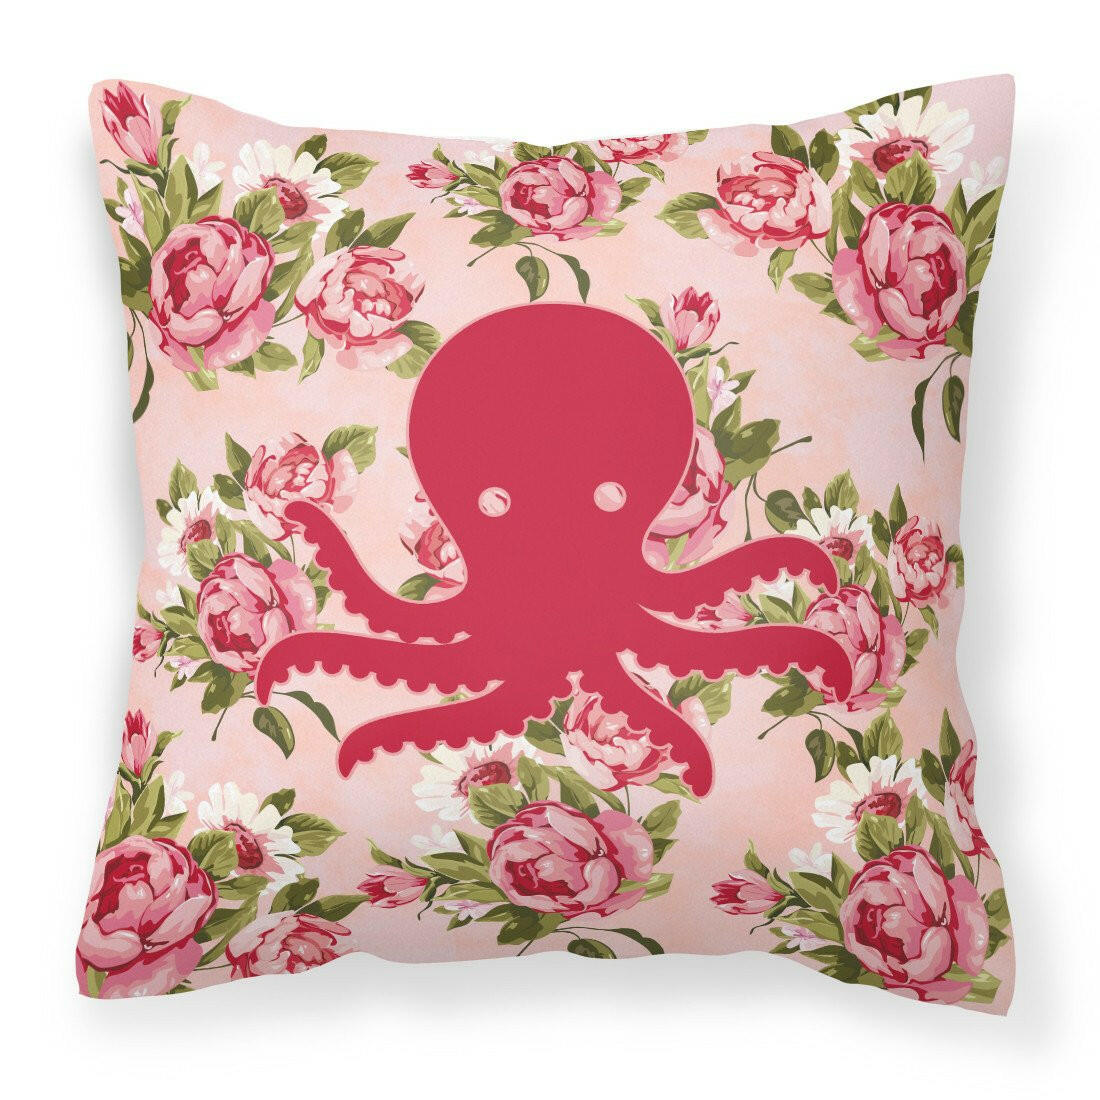 Octopus Shabby Chic Pink Roses  Fabric Decorative Pillow BB1090-RS-PK-PW1414 - the-store.com